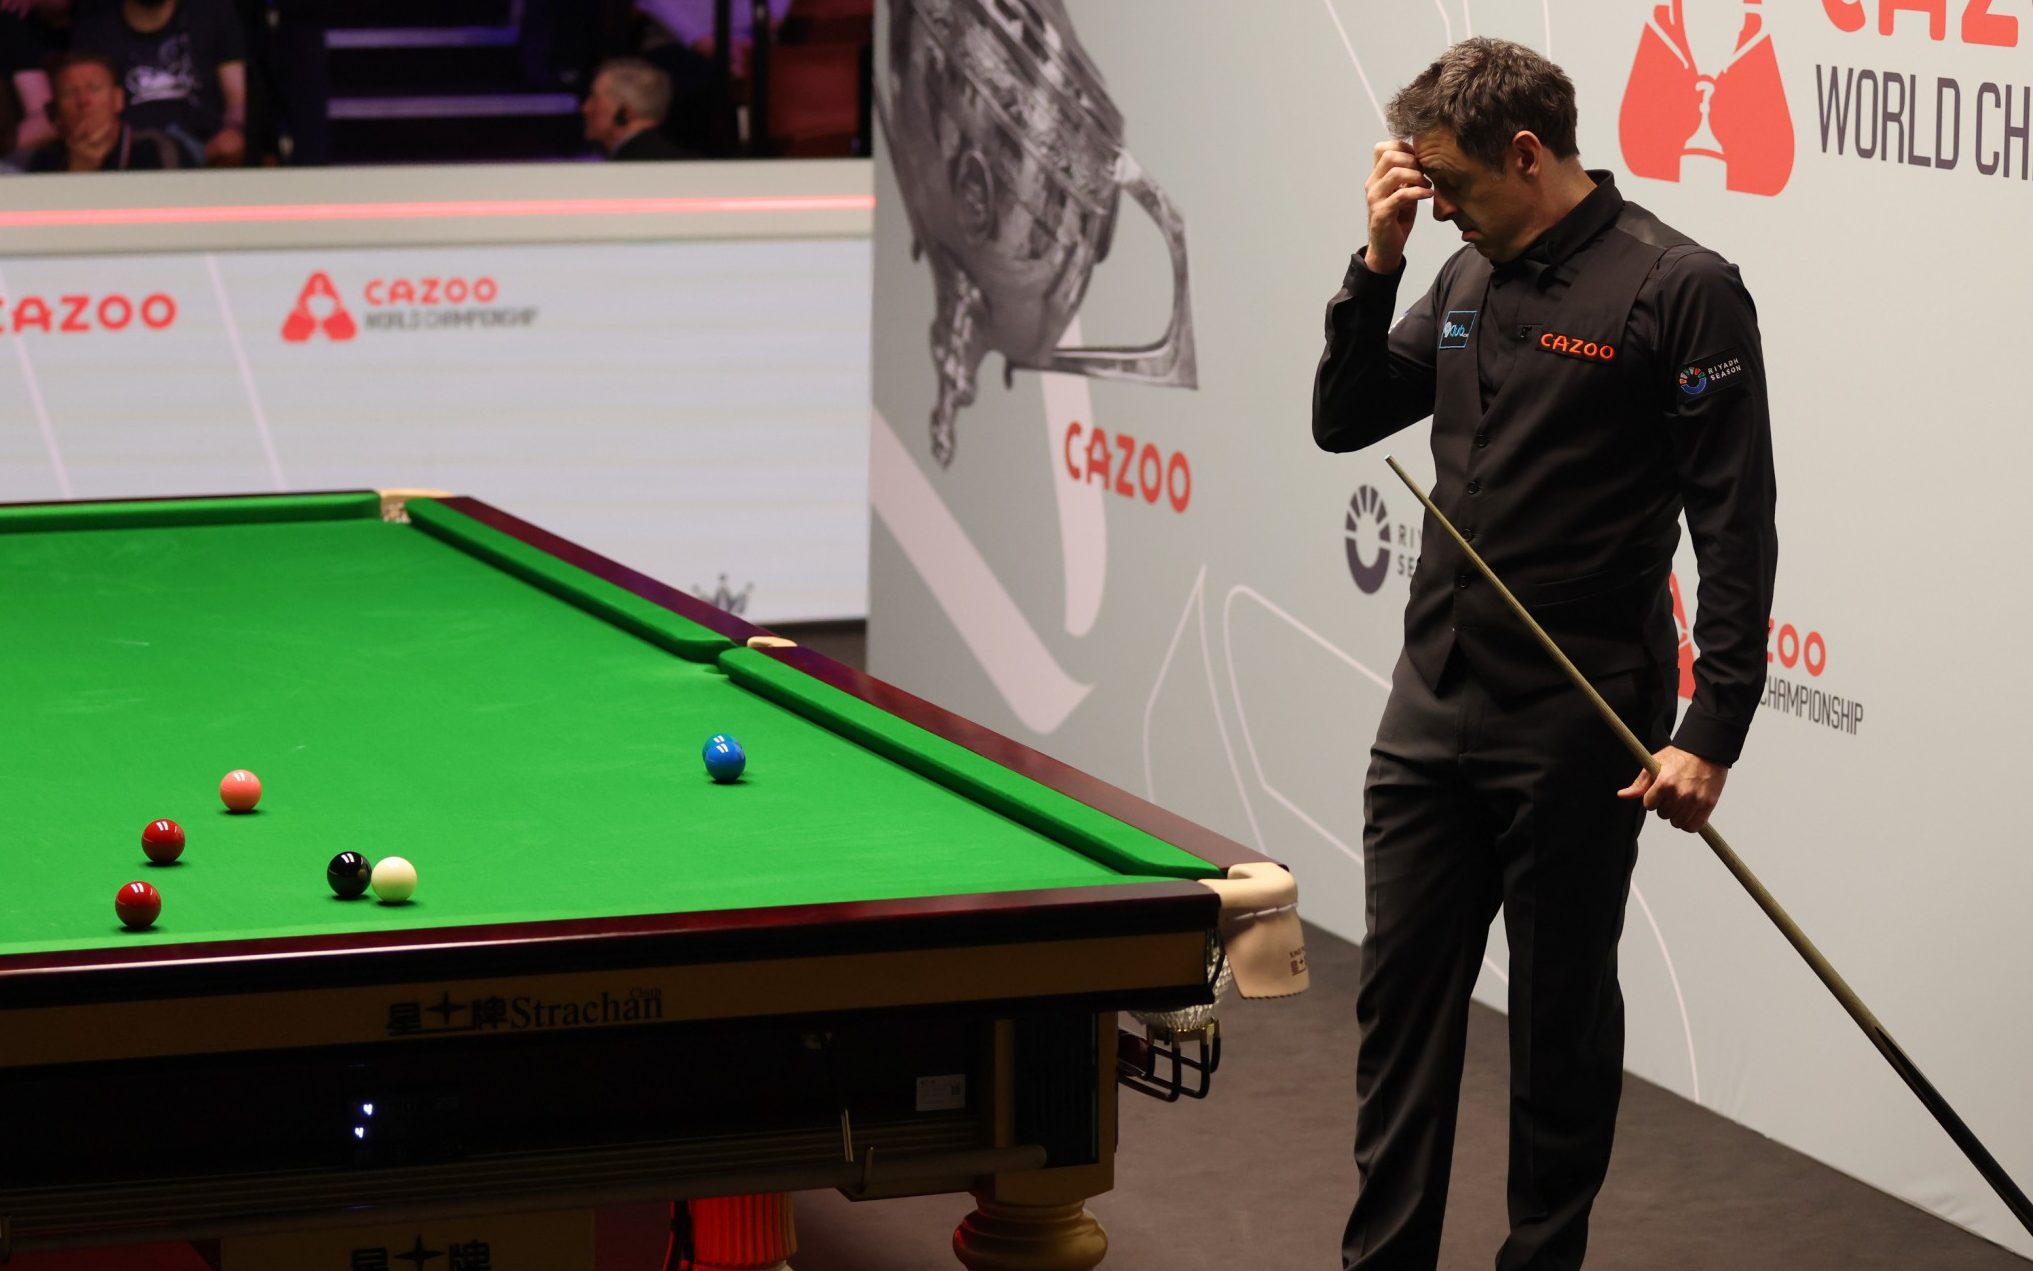 ronnie o’sullivan bows out after being praised for ‘greatest bit of sportsmanship ever’